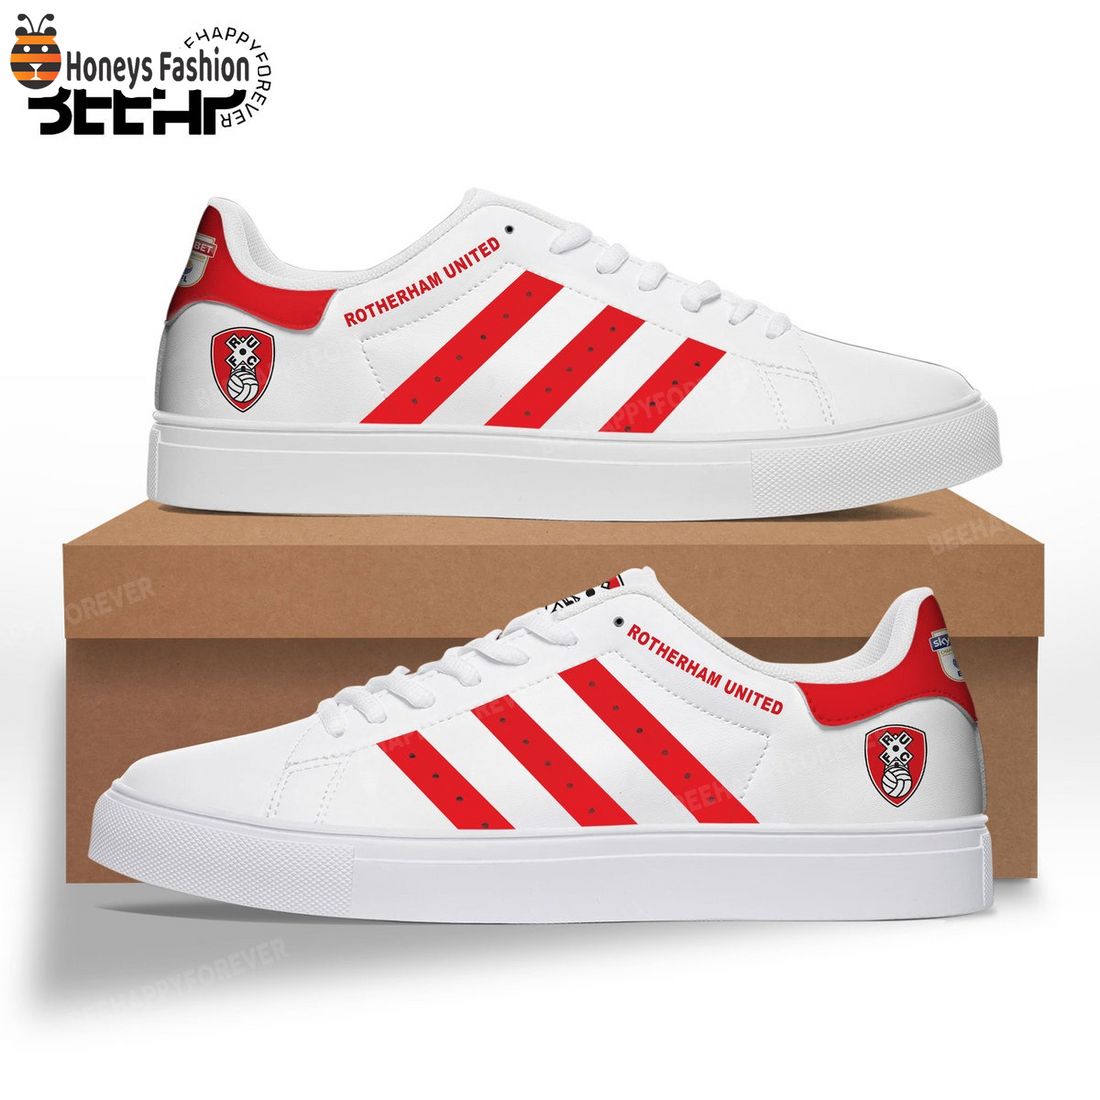 Rotherham United Adidas Stan Smith Trainers